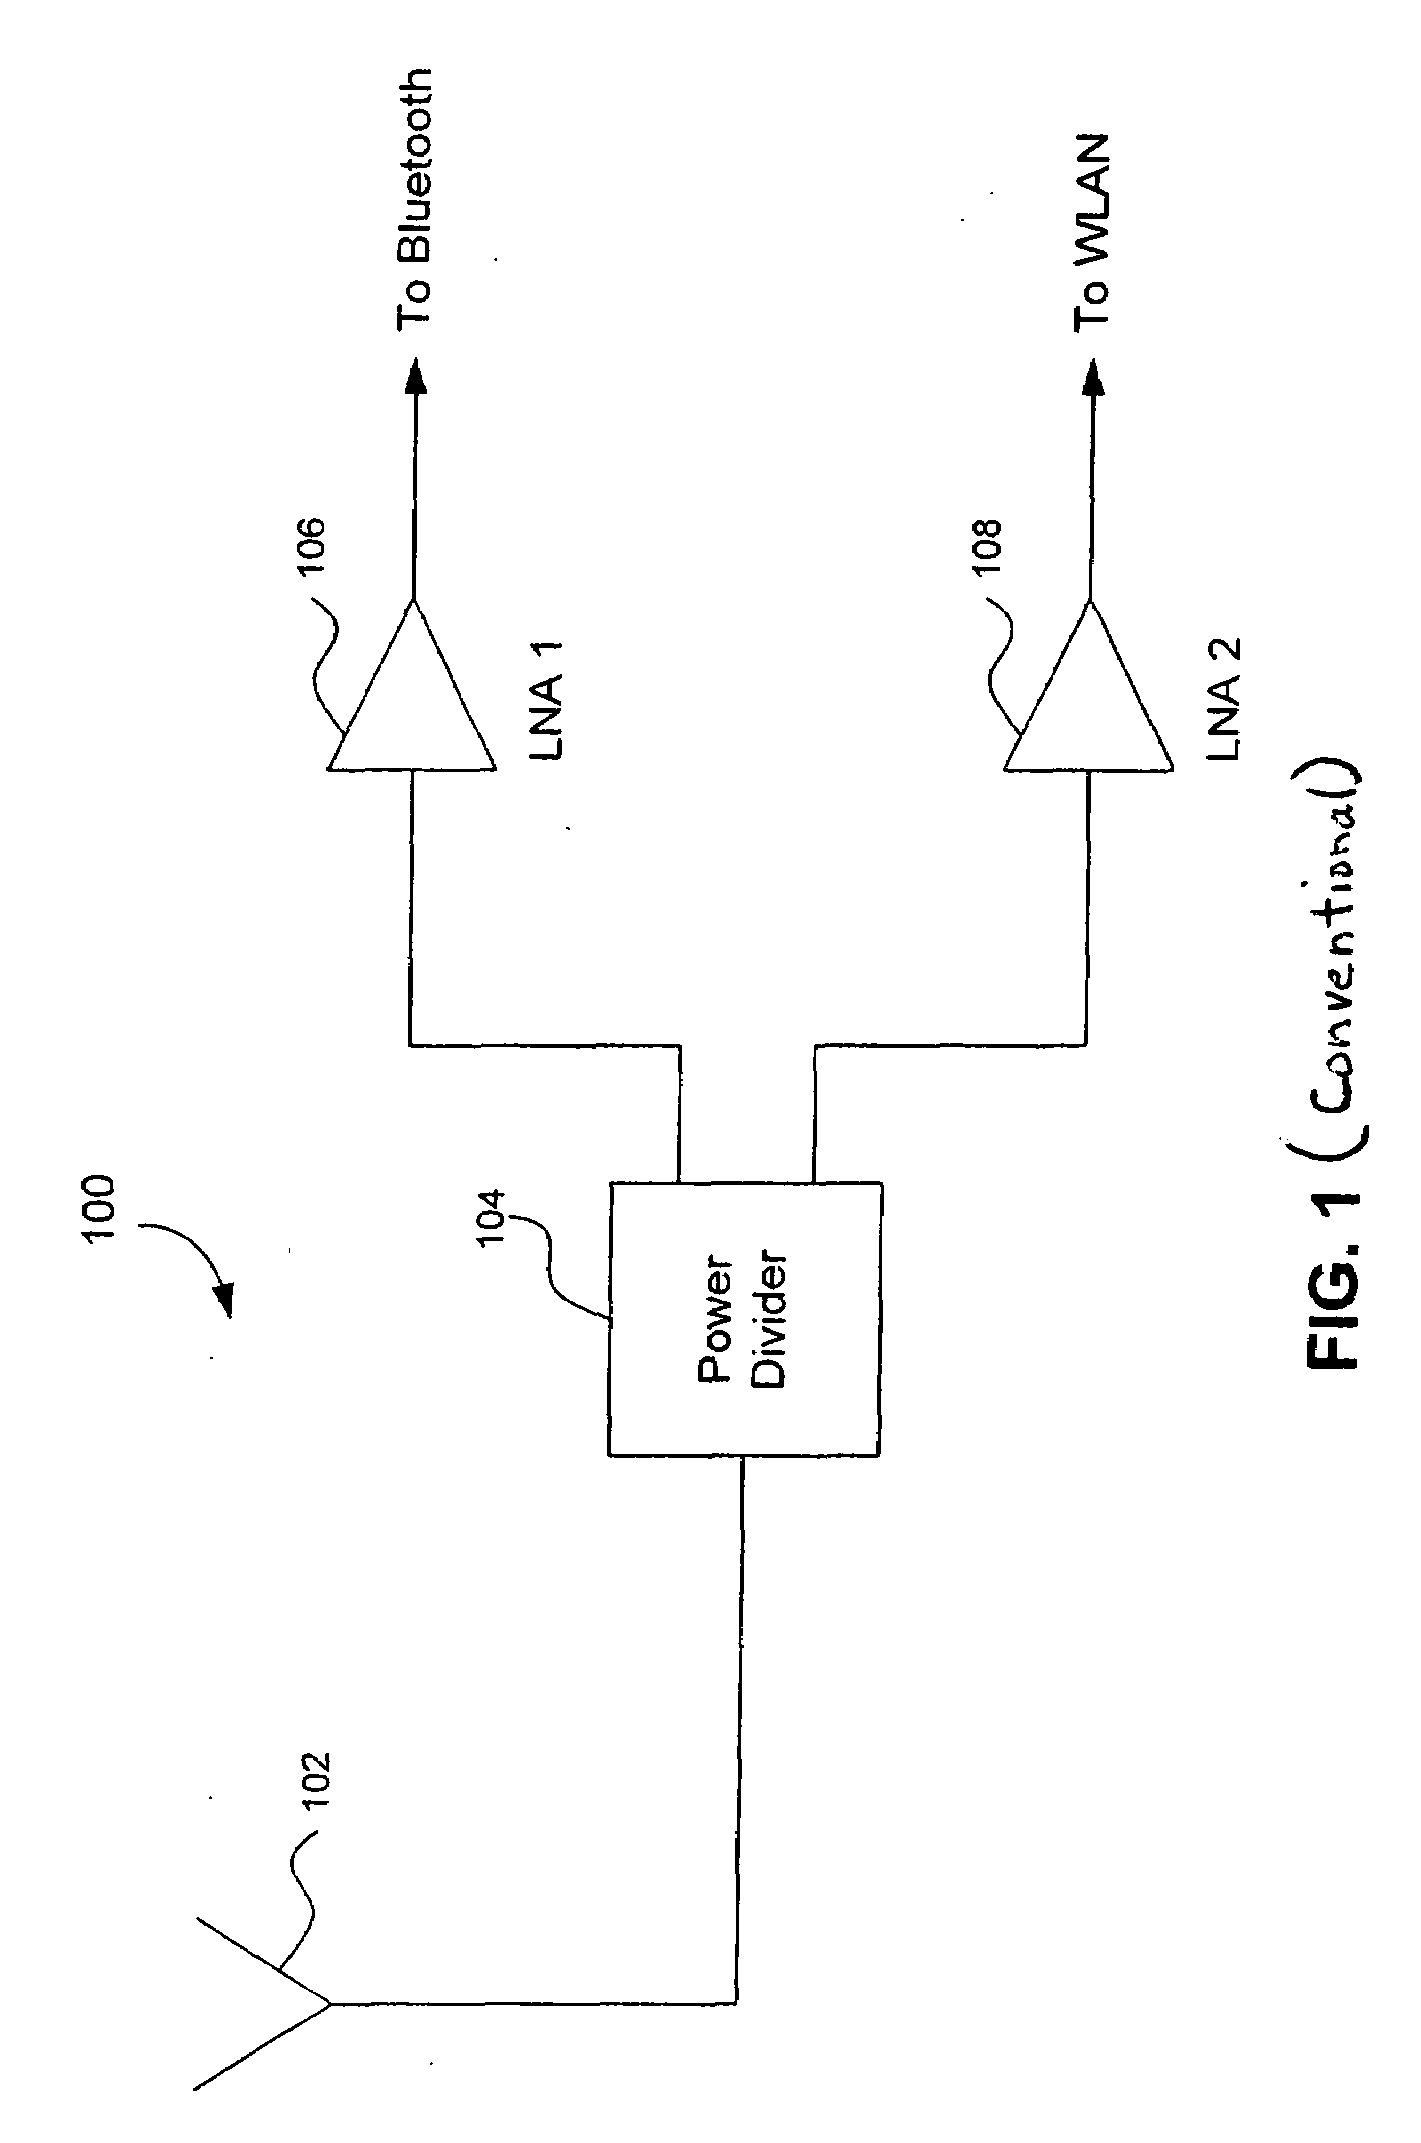 Radio Receiver with shared low noise amplifier for multi-standard operation in a single antenna system with loft isolation and flexible gain control